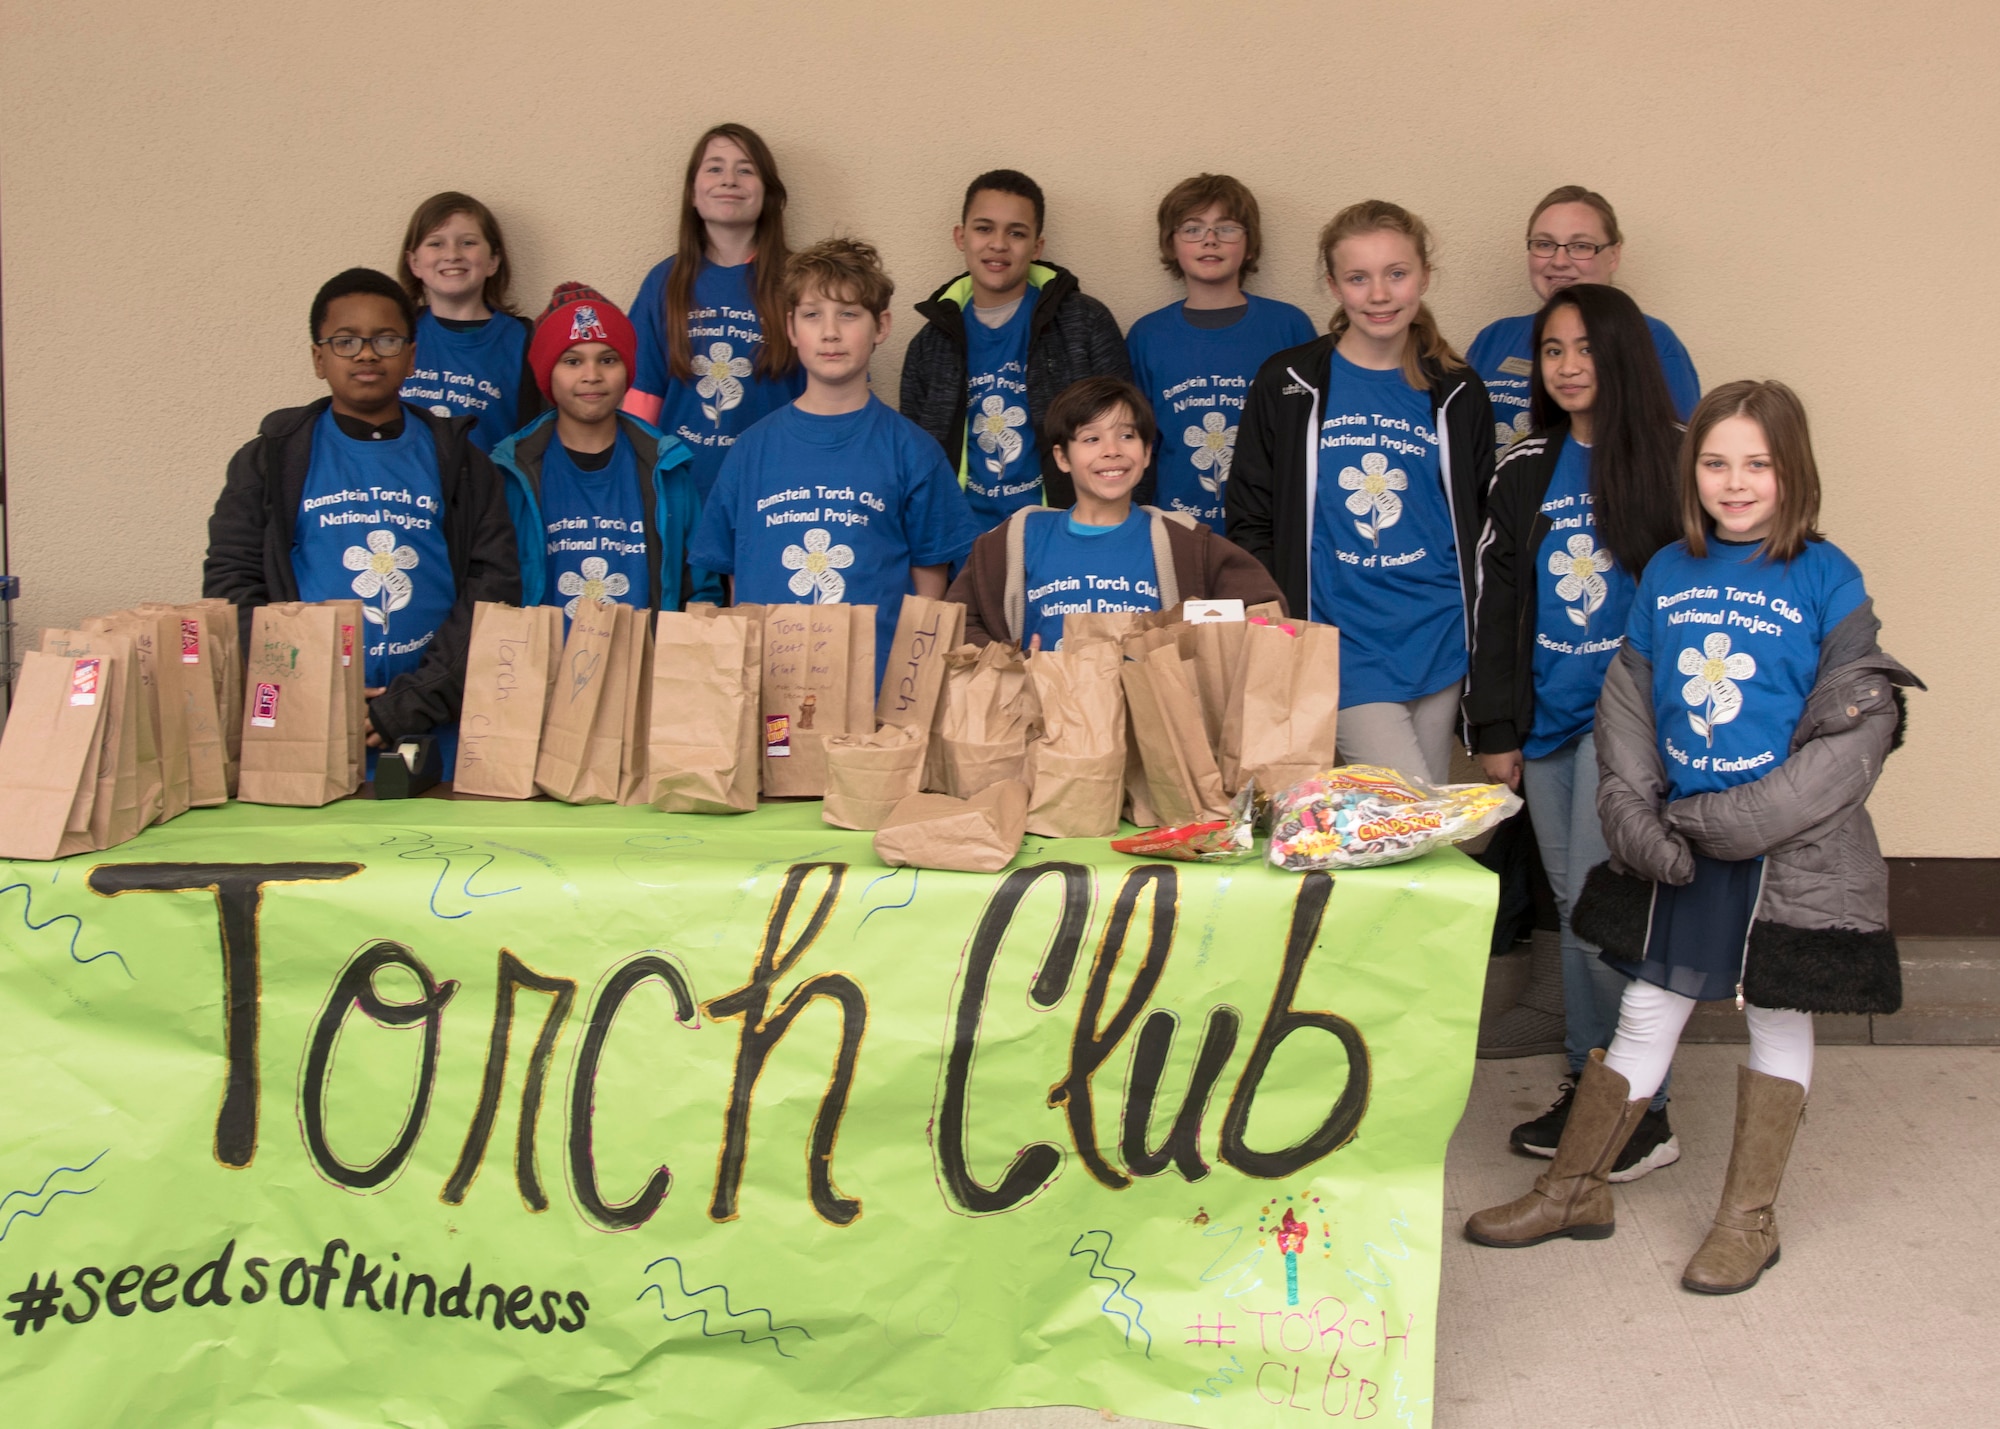 Members of Ramstein’s Boys and Girls Club of America Torch Club pose for a group photo on Ramstein Air Base, Germany, March 7, 2018. The Torch Club planted “seeds of kindness” at the Ramstein Base Commissary to give back to the community. This was their first national project as a group. The Torch Club meets on Wednesdays at the Youth Programs building from 4:00 p.m. - 5:00 p.m. (U.S. Air Force photo by Airman 1st Class Kaylea Berry)